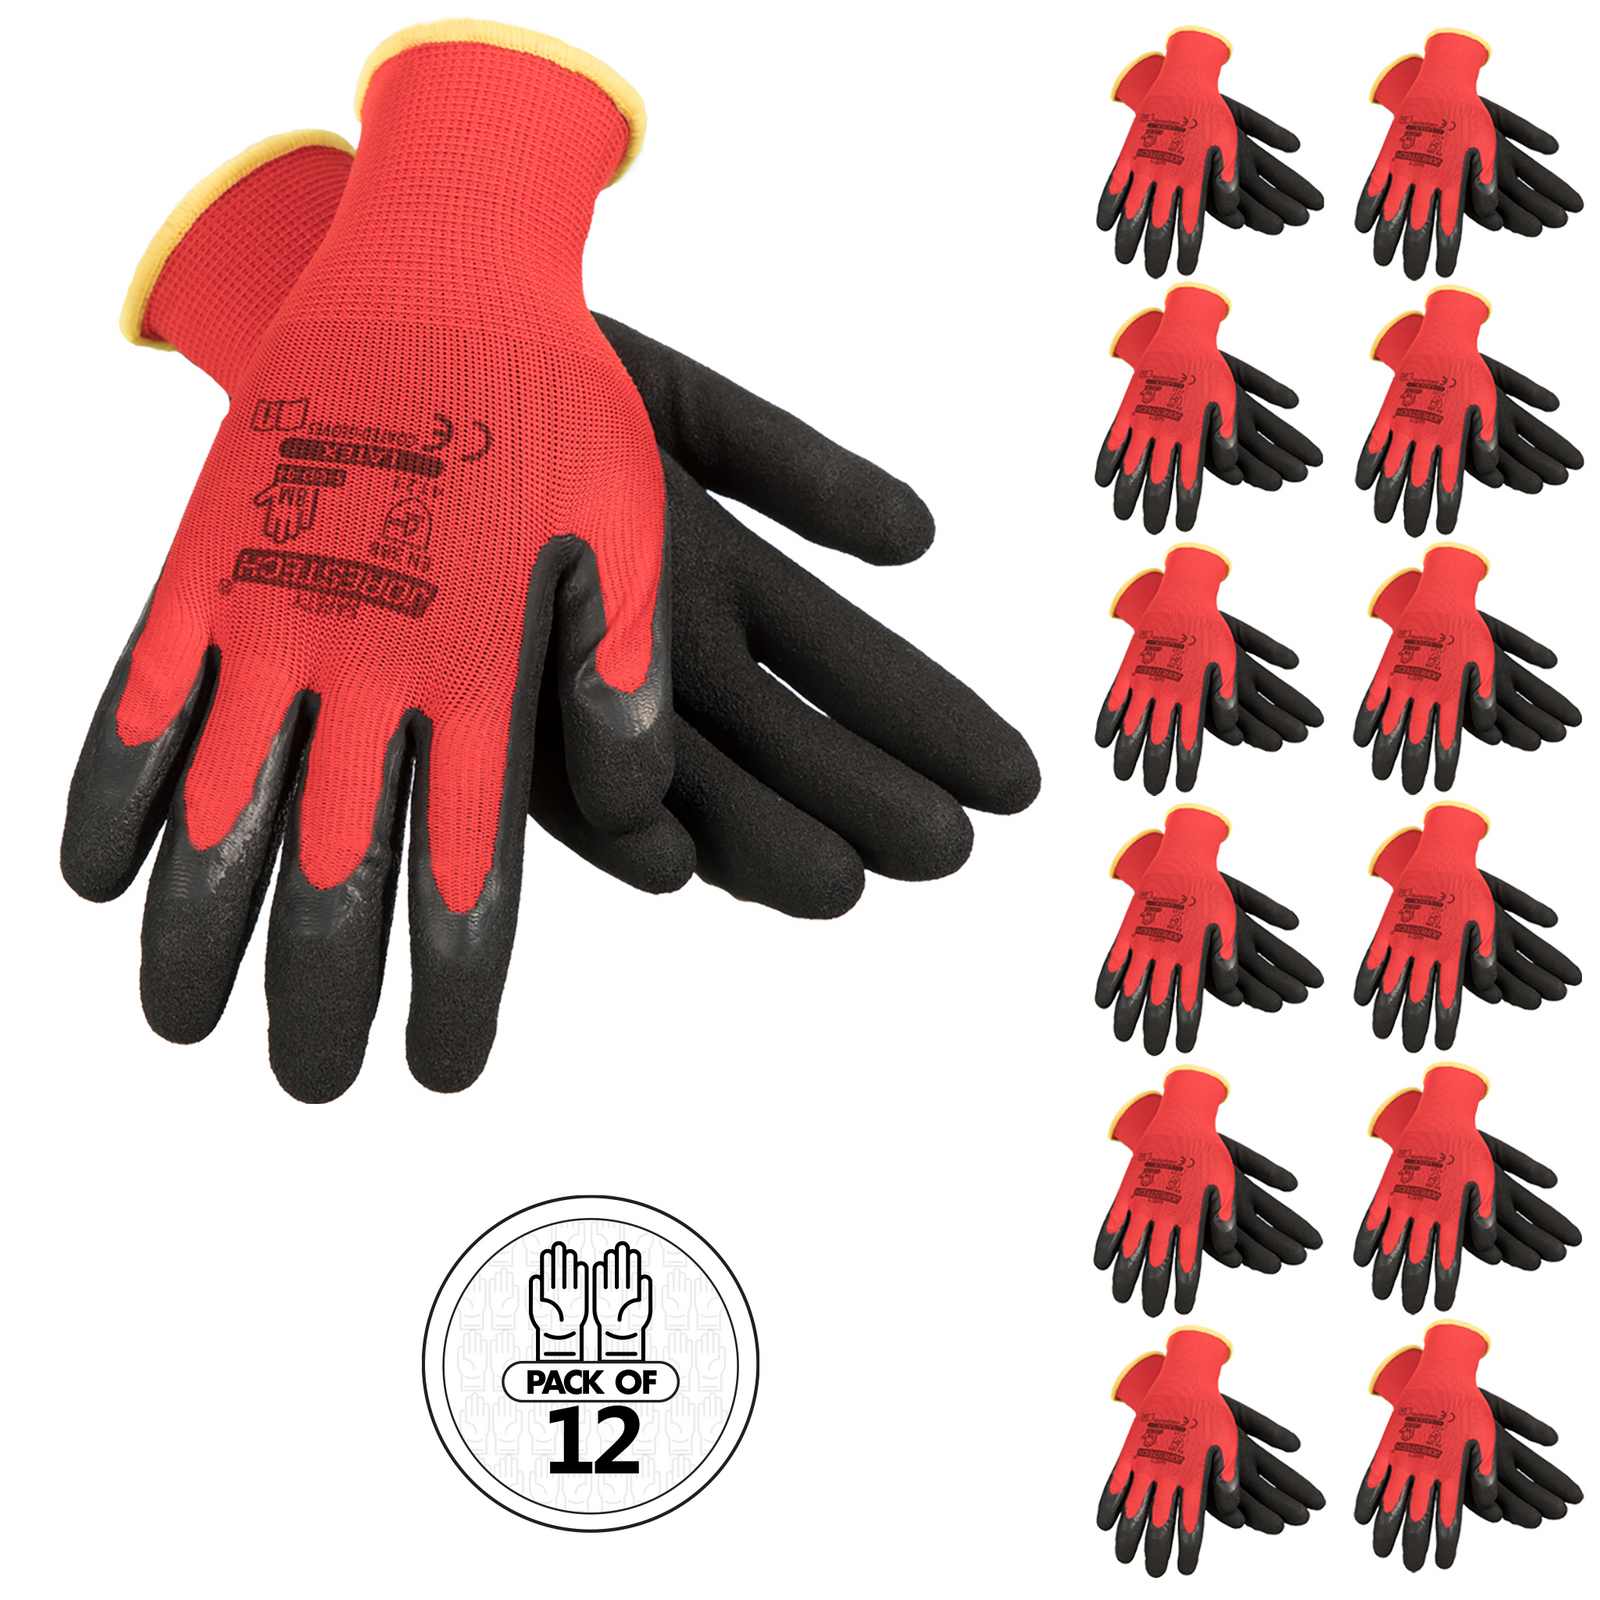 Pack of 12 red and back safety work gloves with latex dipped palms